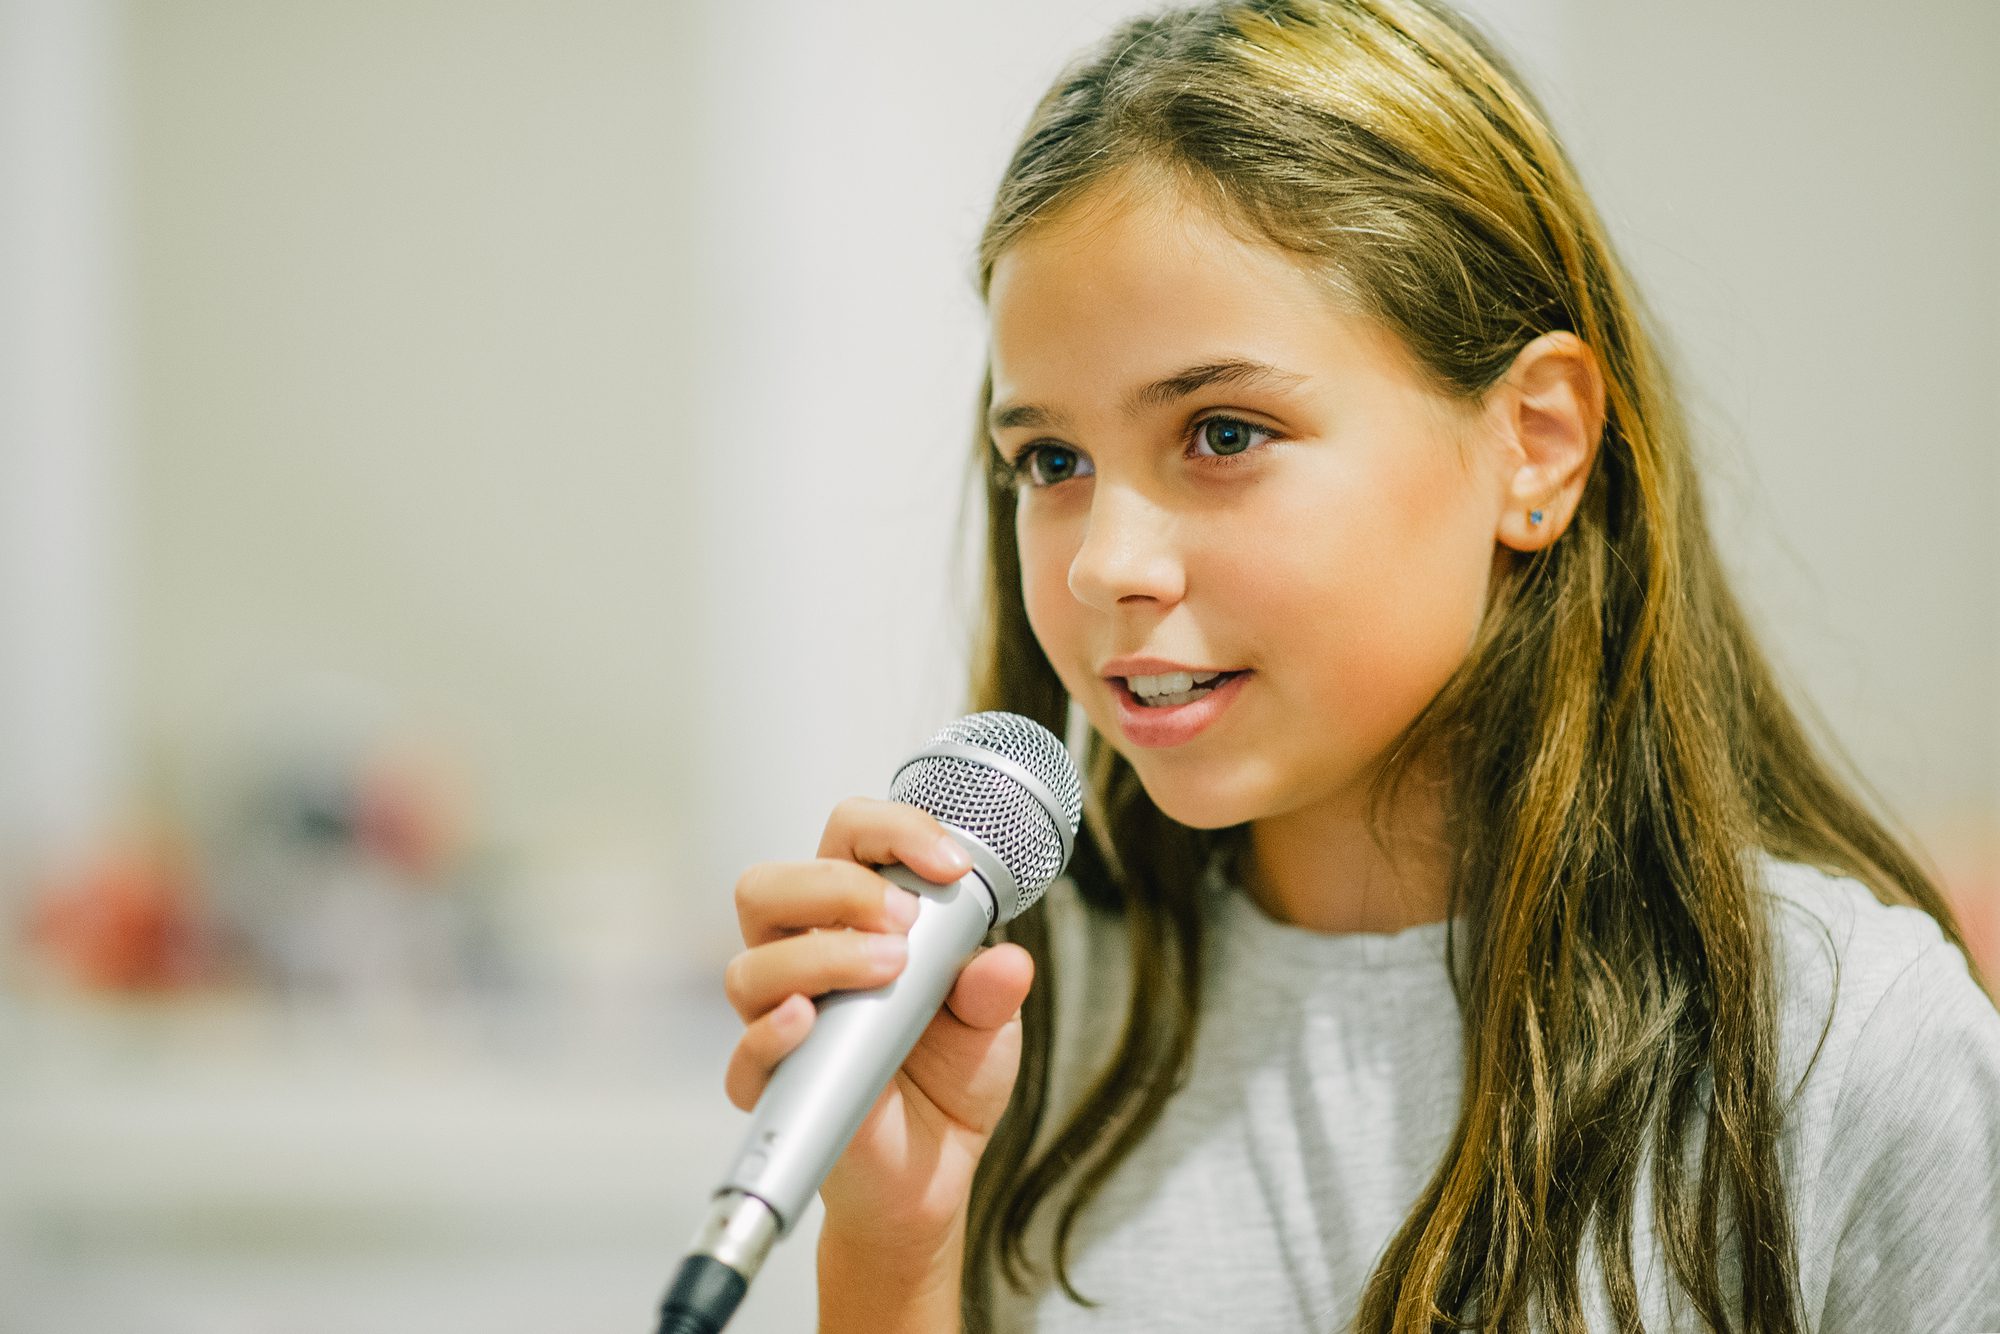 A girl holding a microphone up to her mouth.